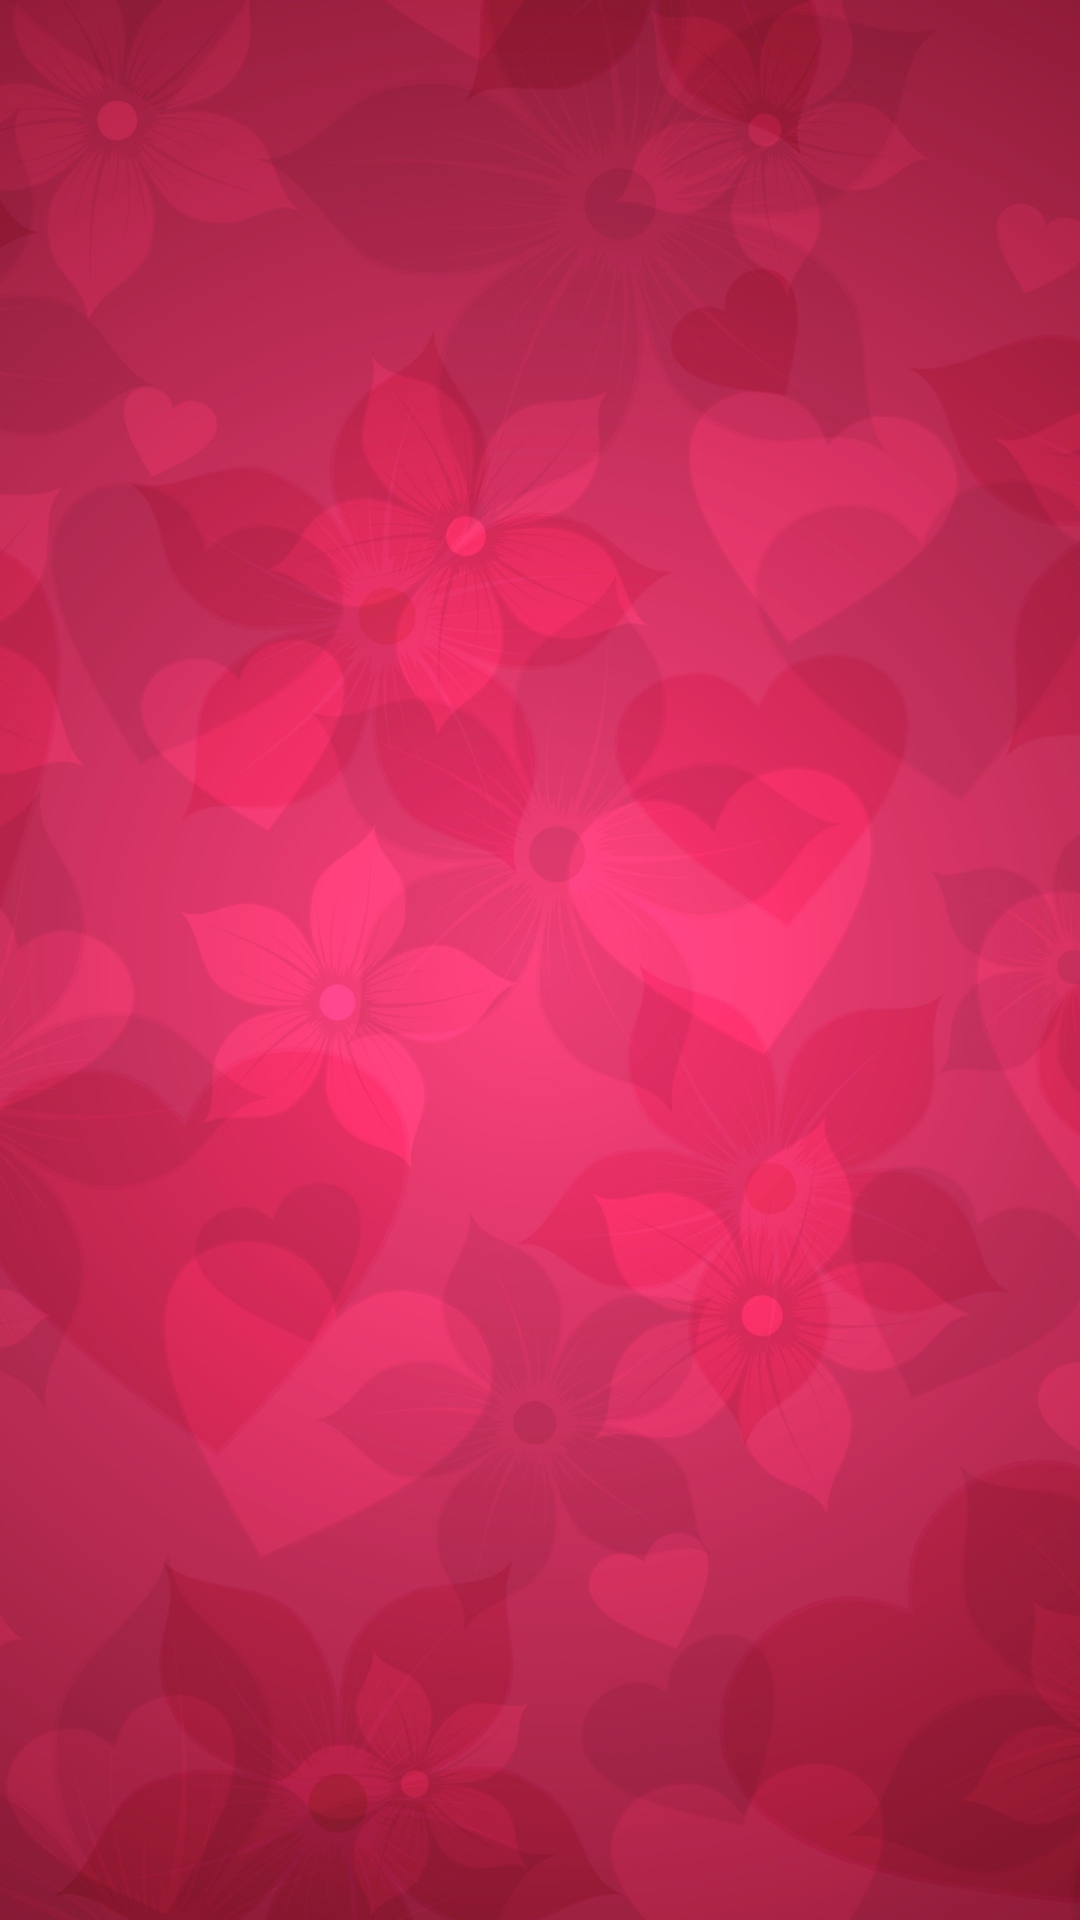 Pink Hearts And Flowers Pattern wallpaper 1080x1920